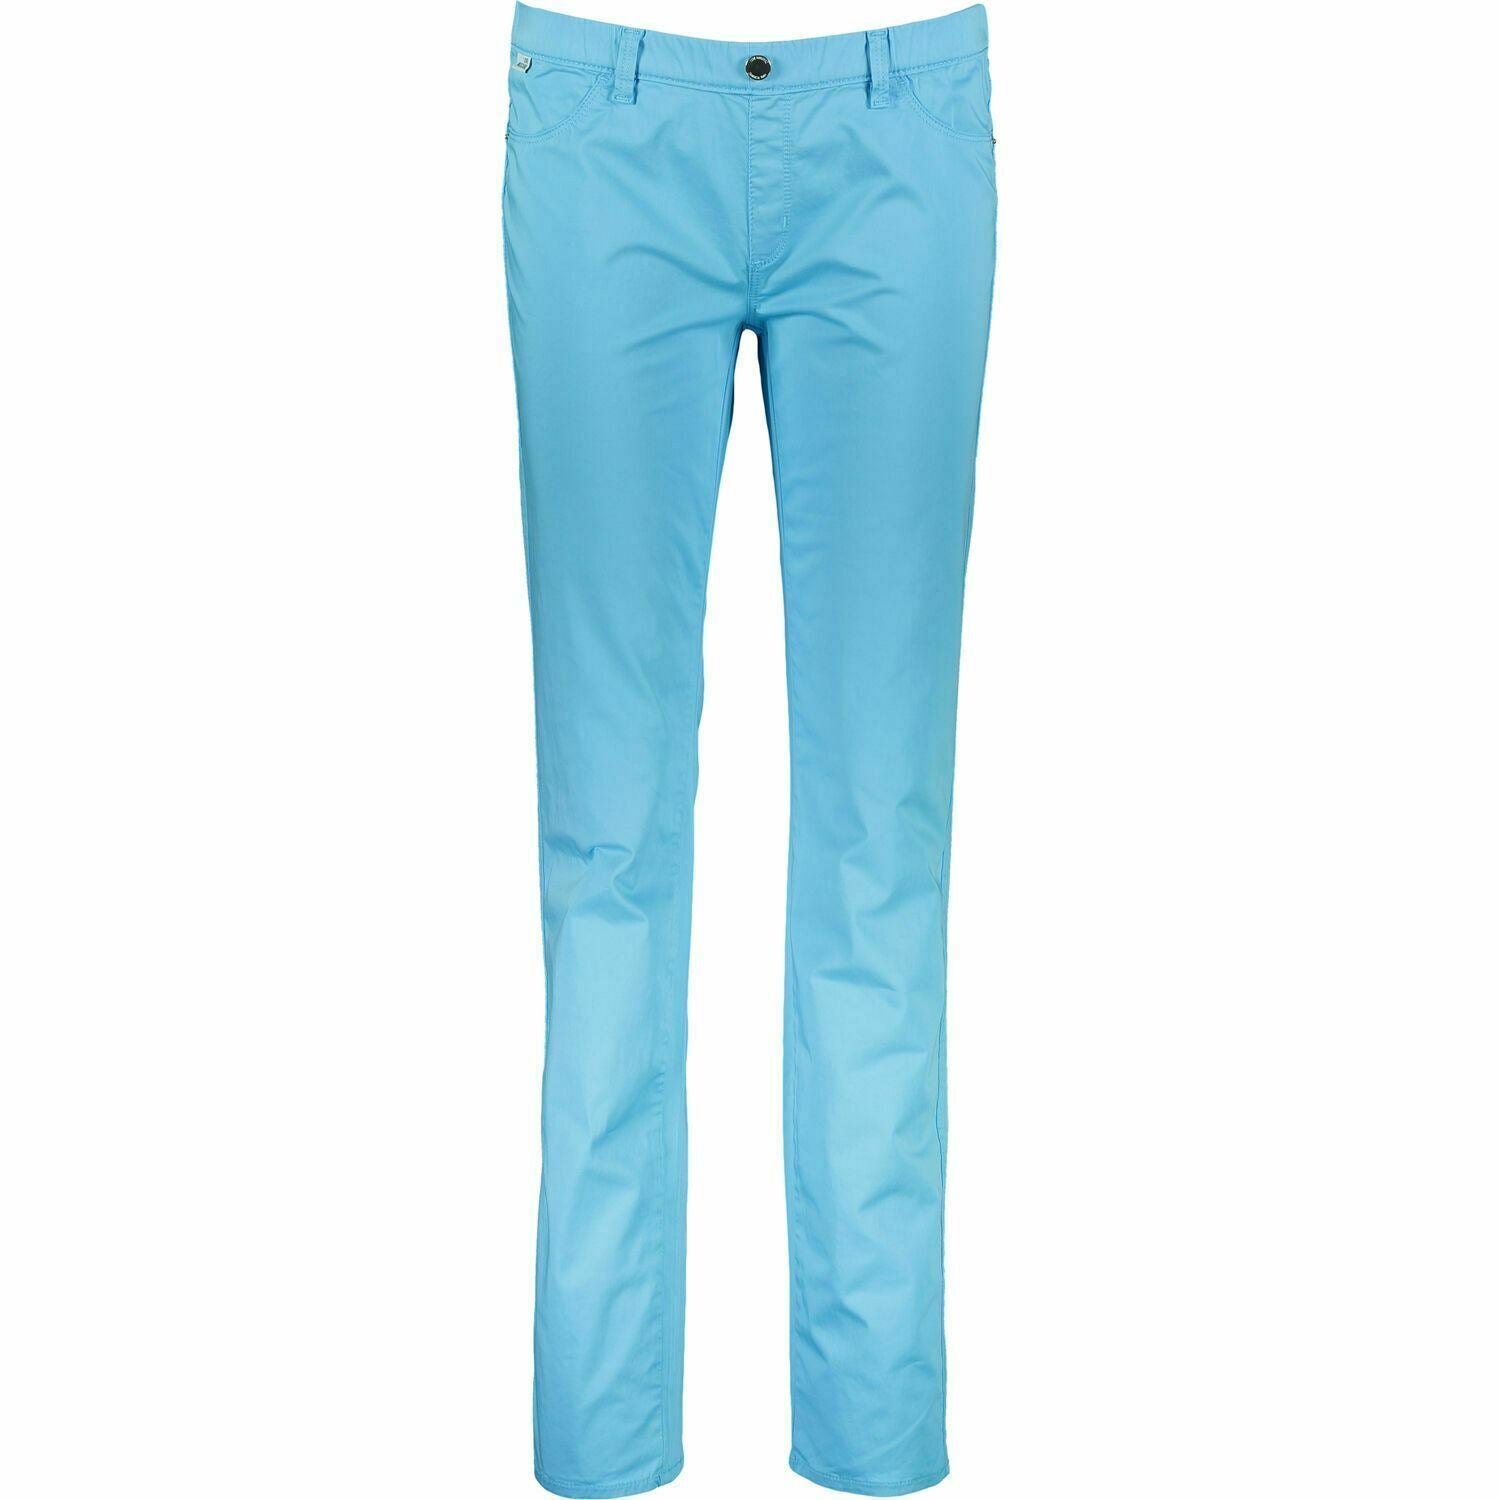 Love Moschino Women's Turquoise Blue Pants Trousers, size W27